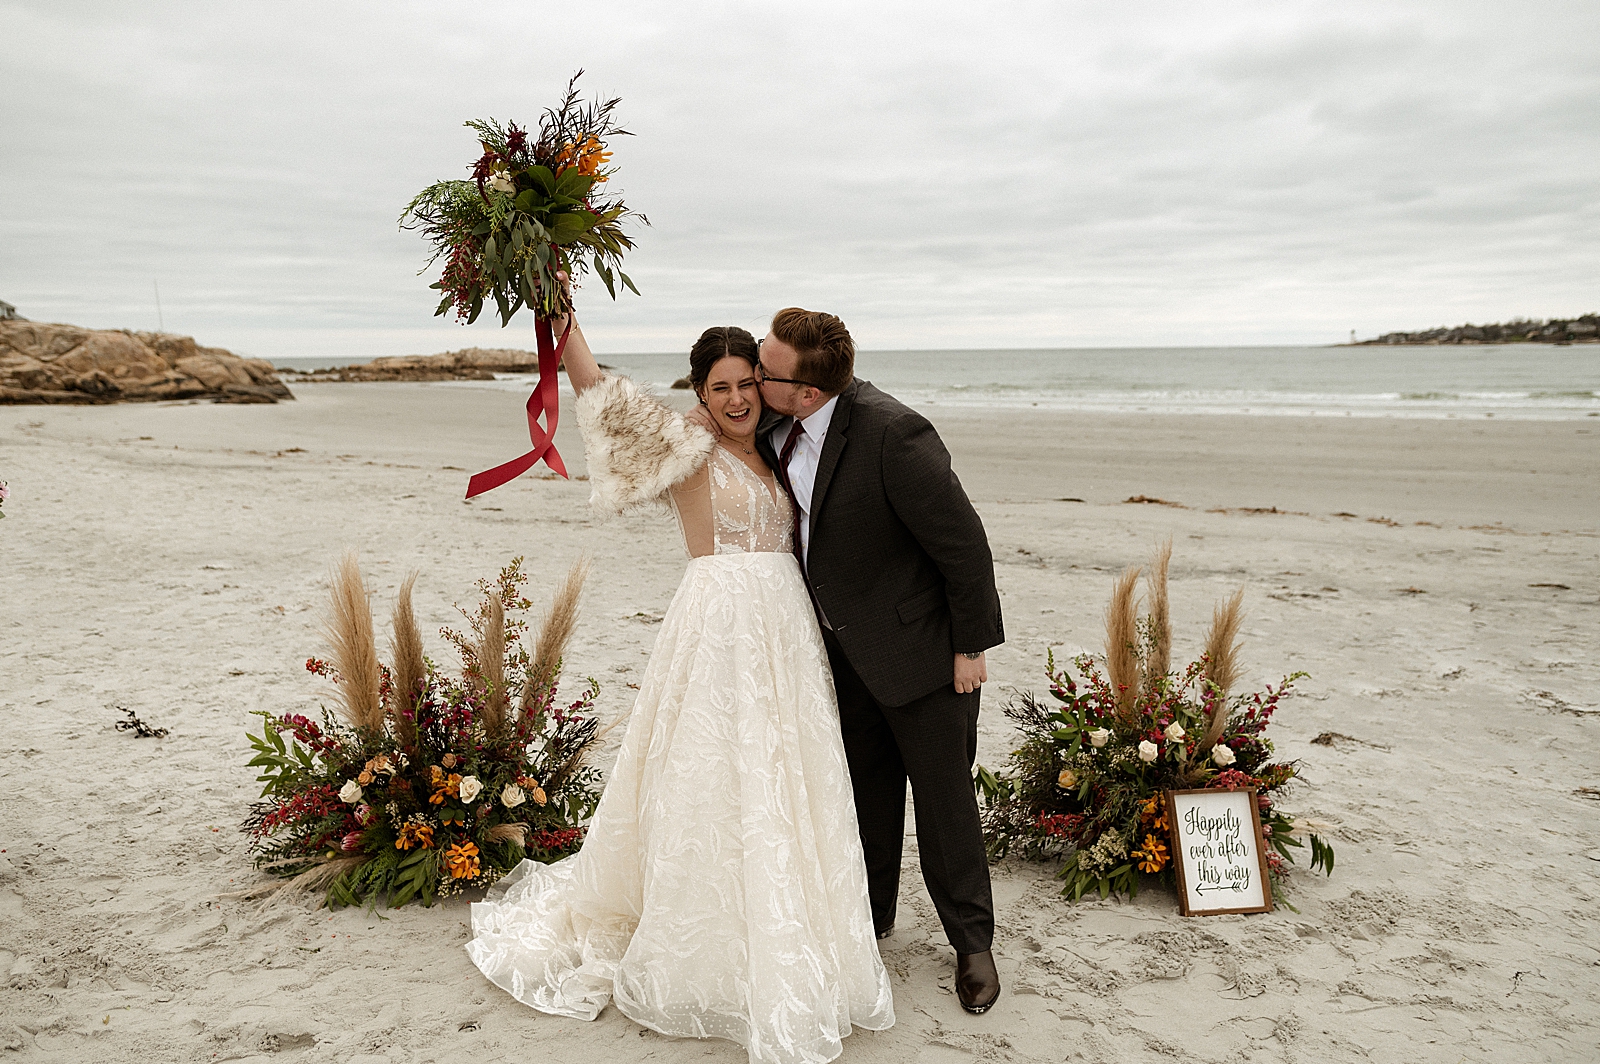 Bride lifting up bouquet with Groom kissing Bride on the cheek on the beach